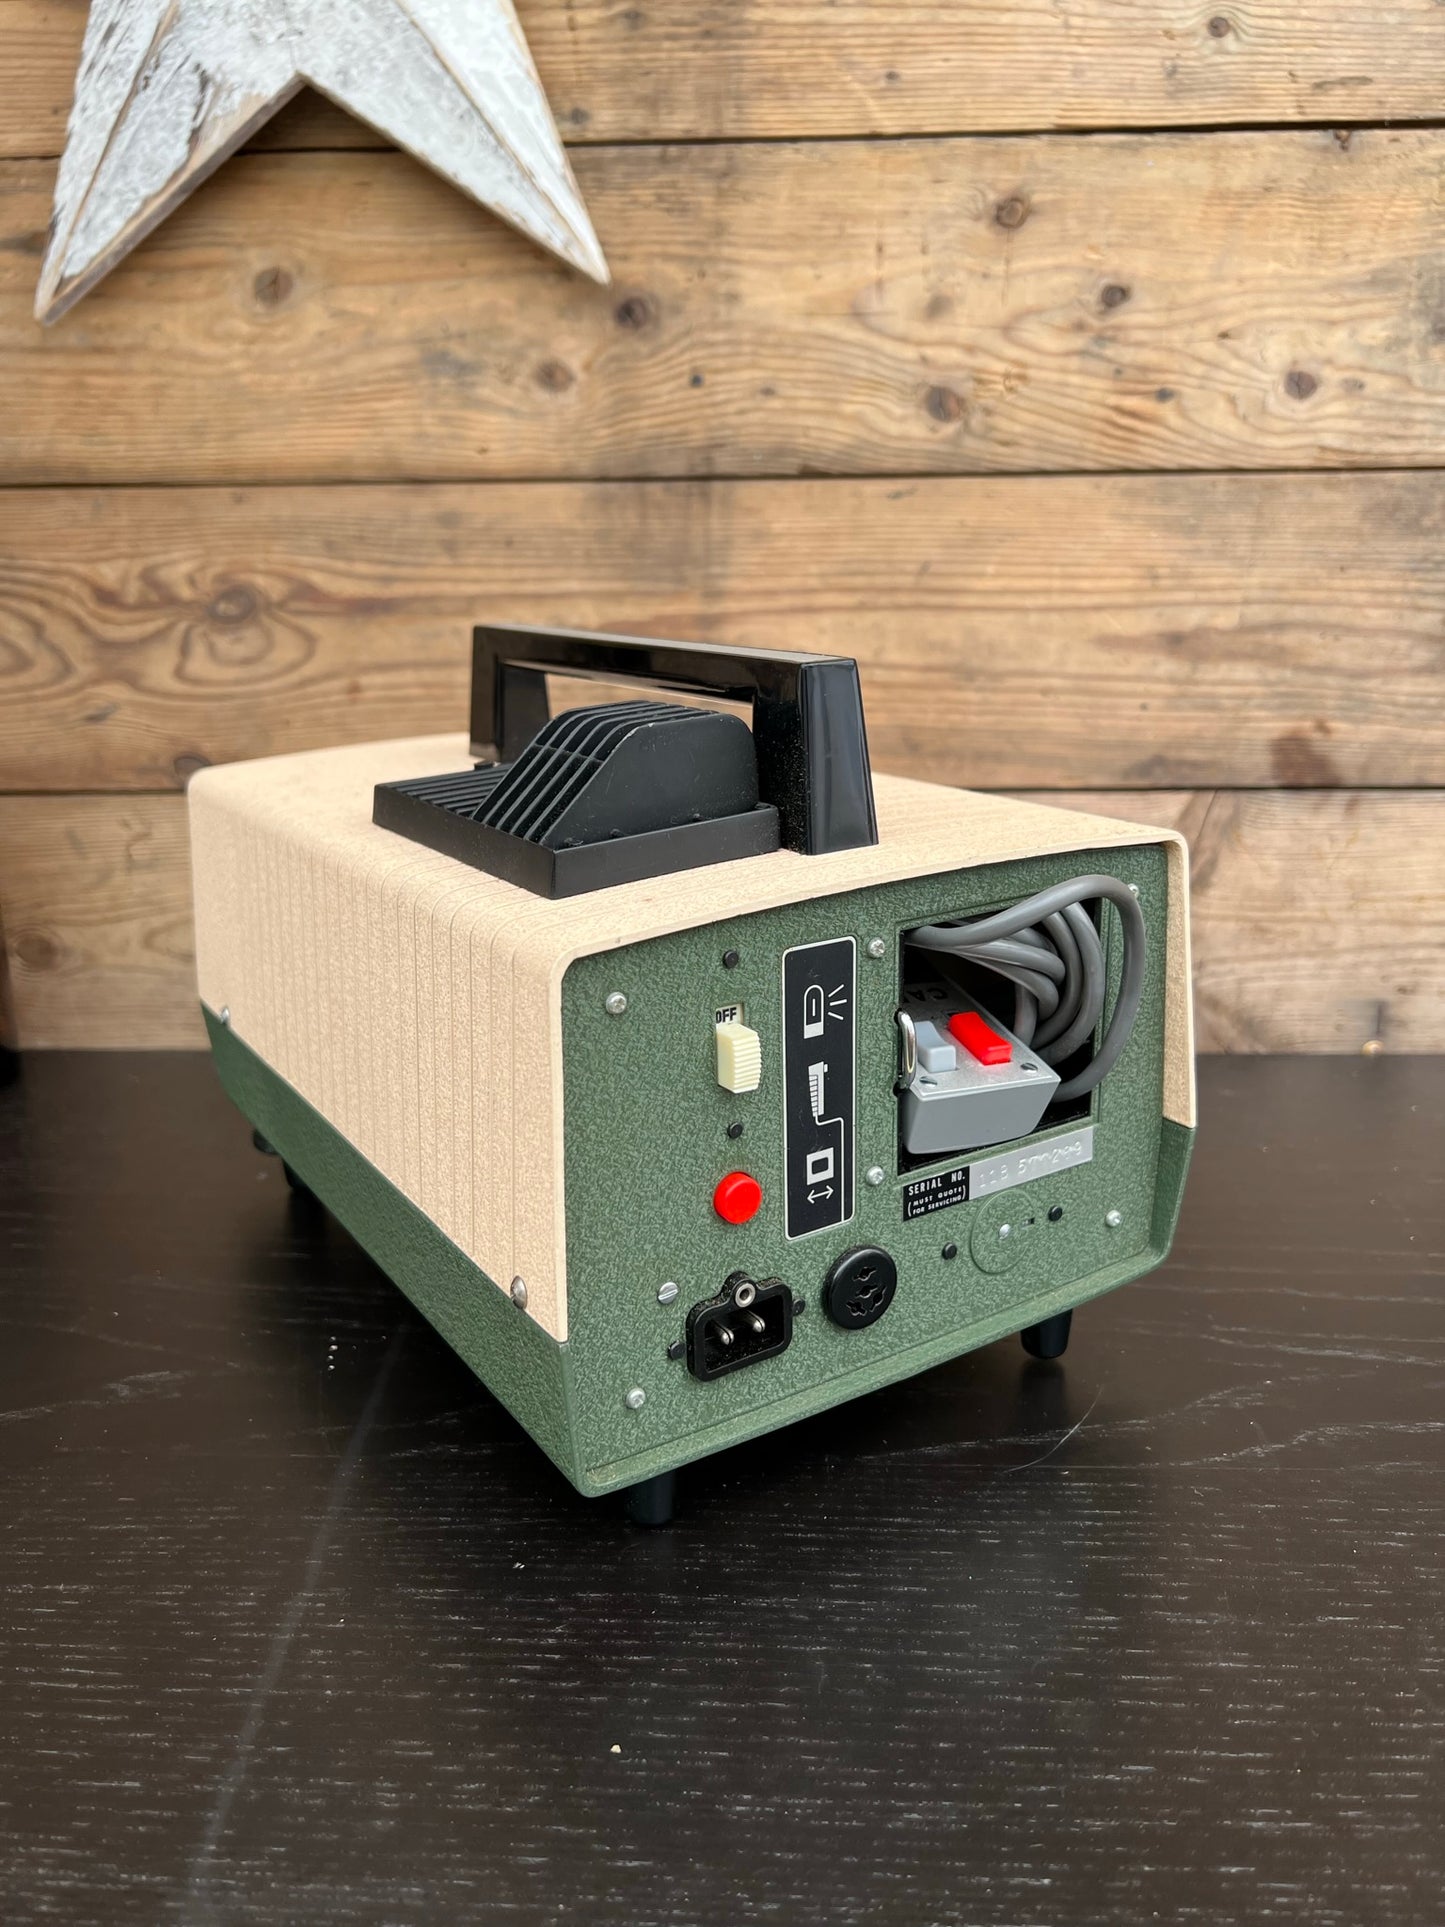 Cabin Automat Vintage Japanese Slide Projector Retro Collectable